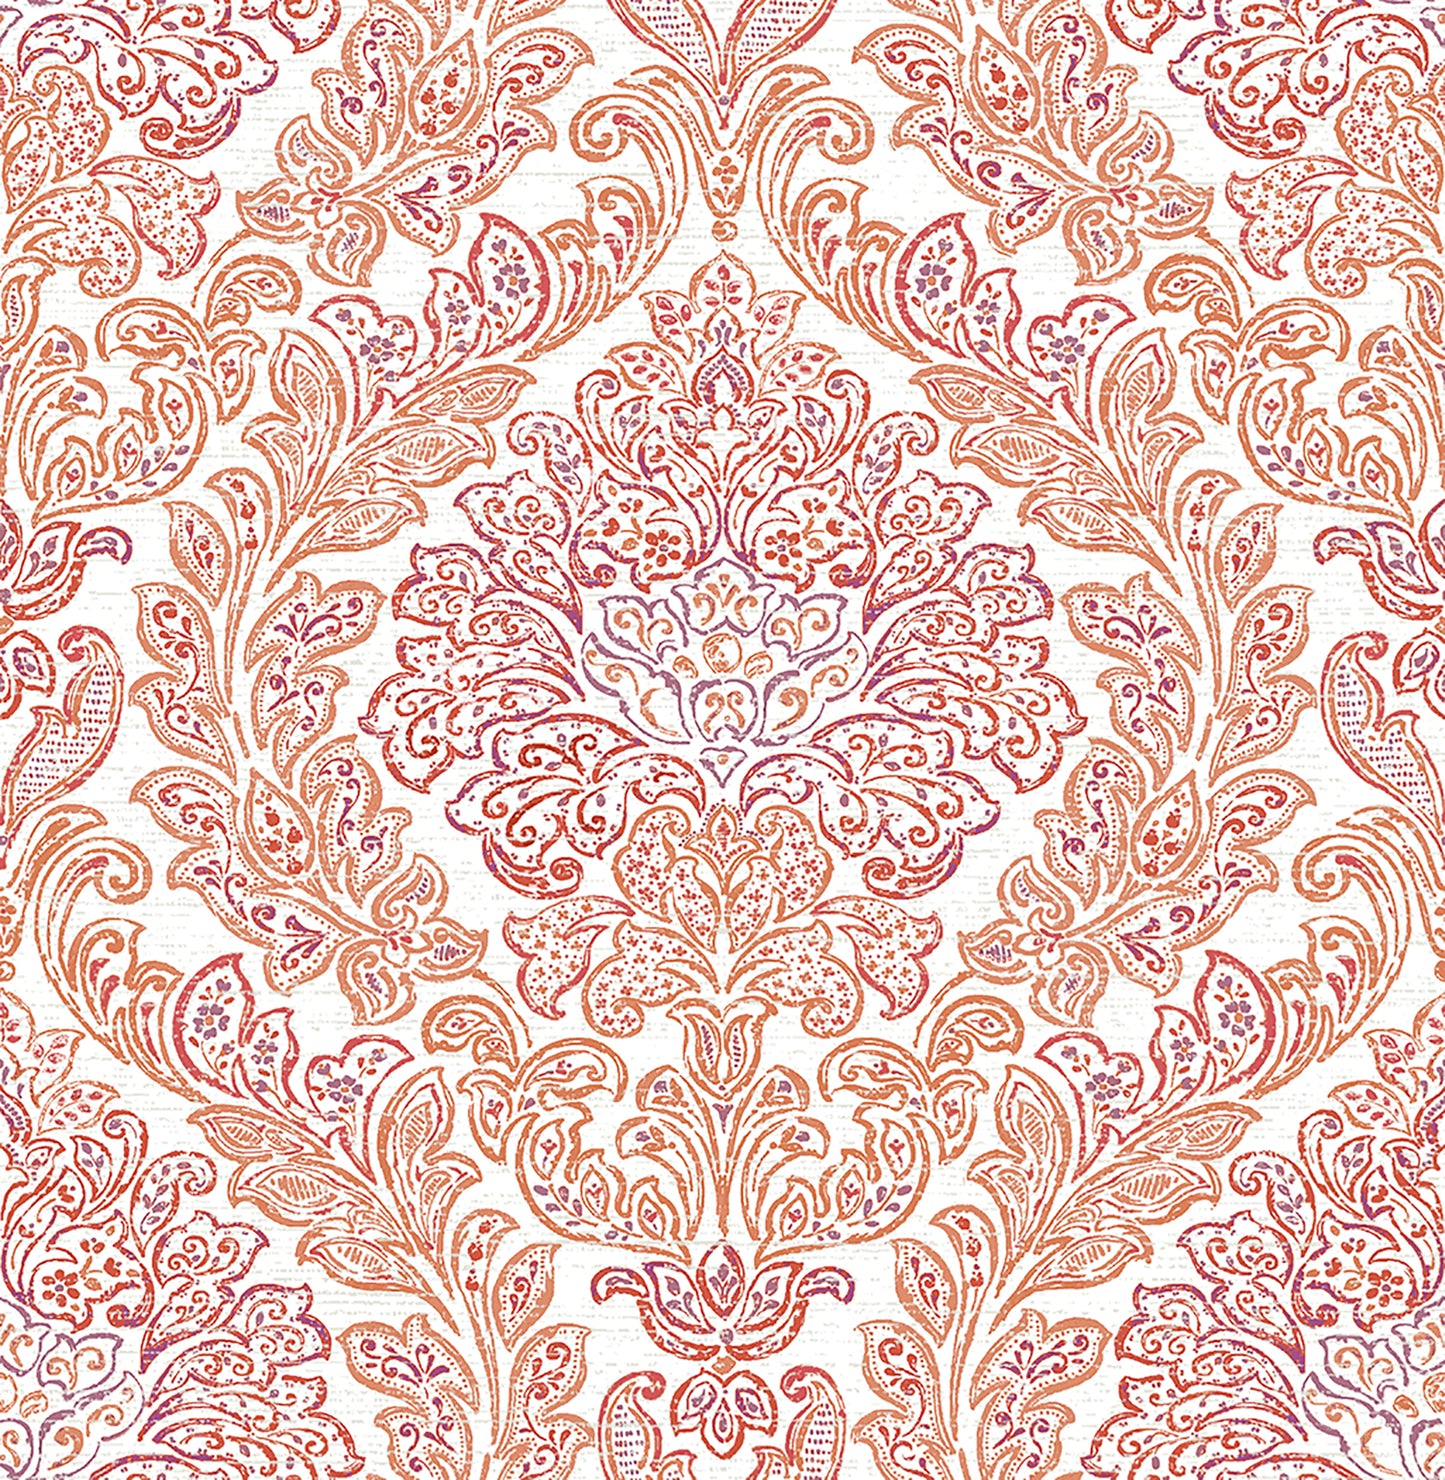 Save on 2702-22745 Fontaine Orange Damask by A-Street Prints Wallpaper